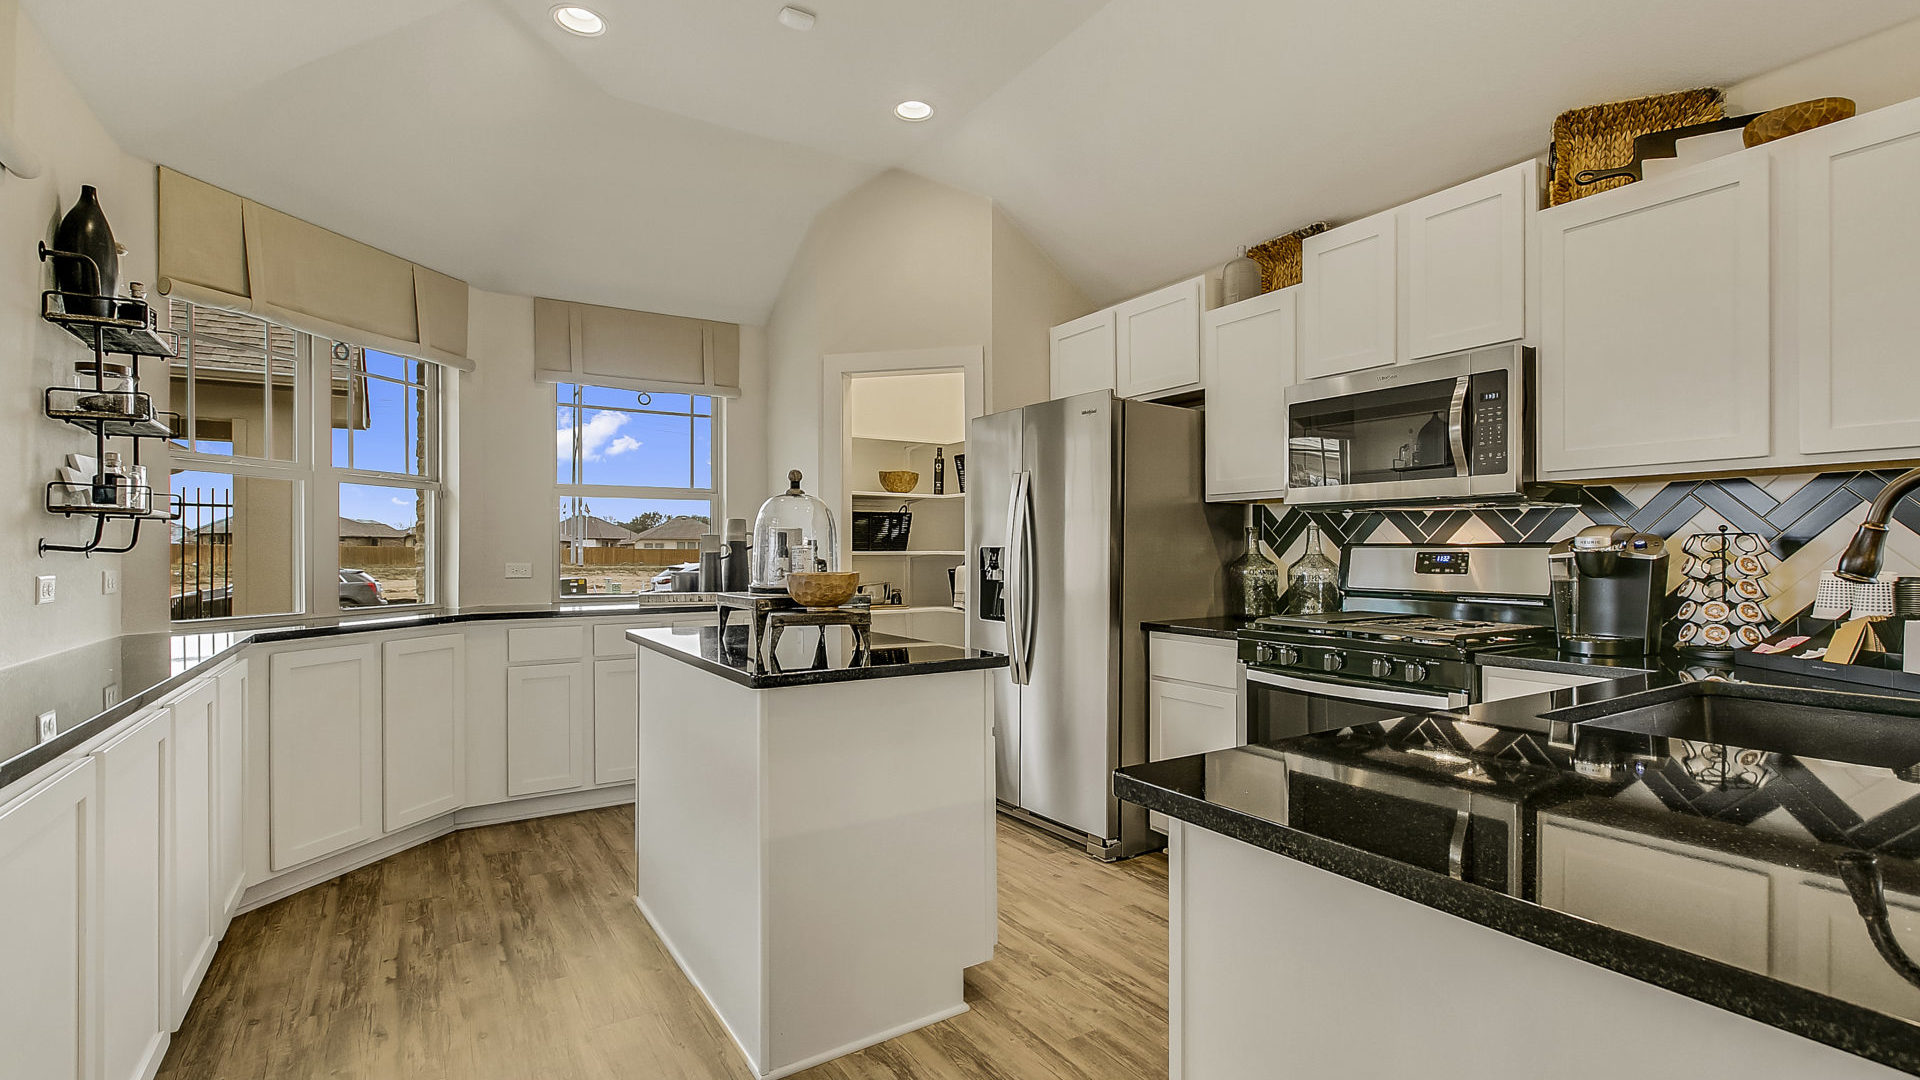 Pecan Park Model Home Kitchen With Wrap Around Counter And Island